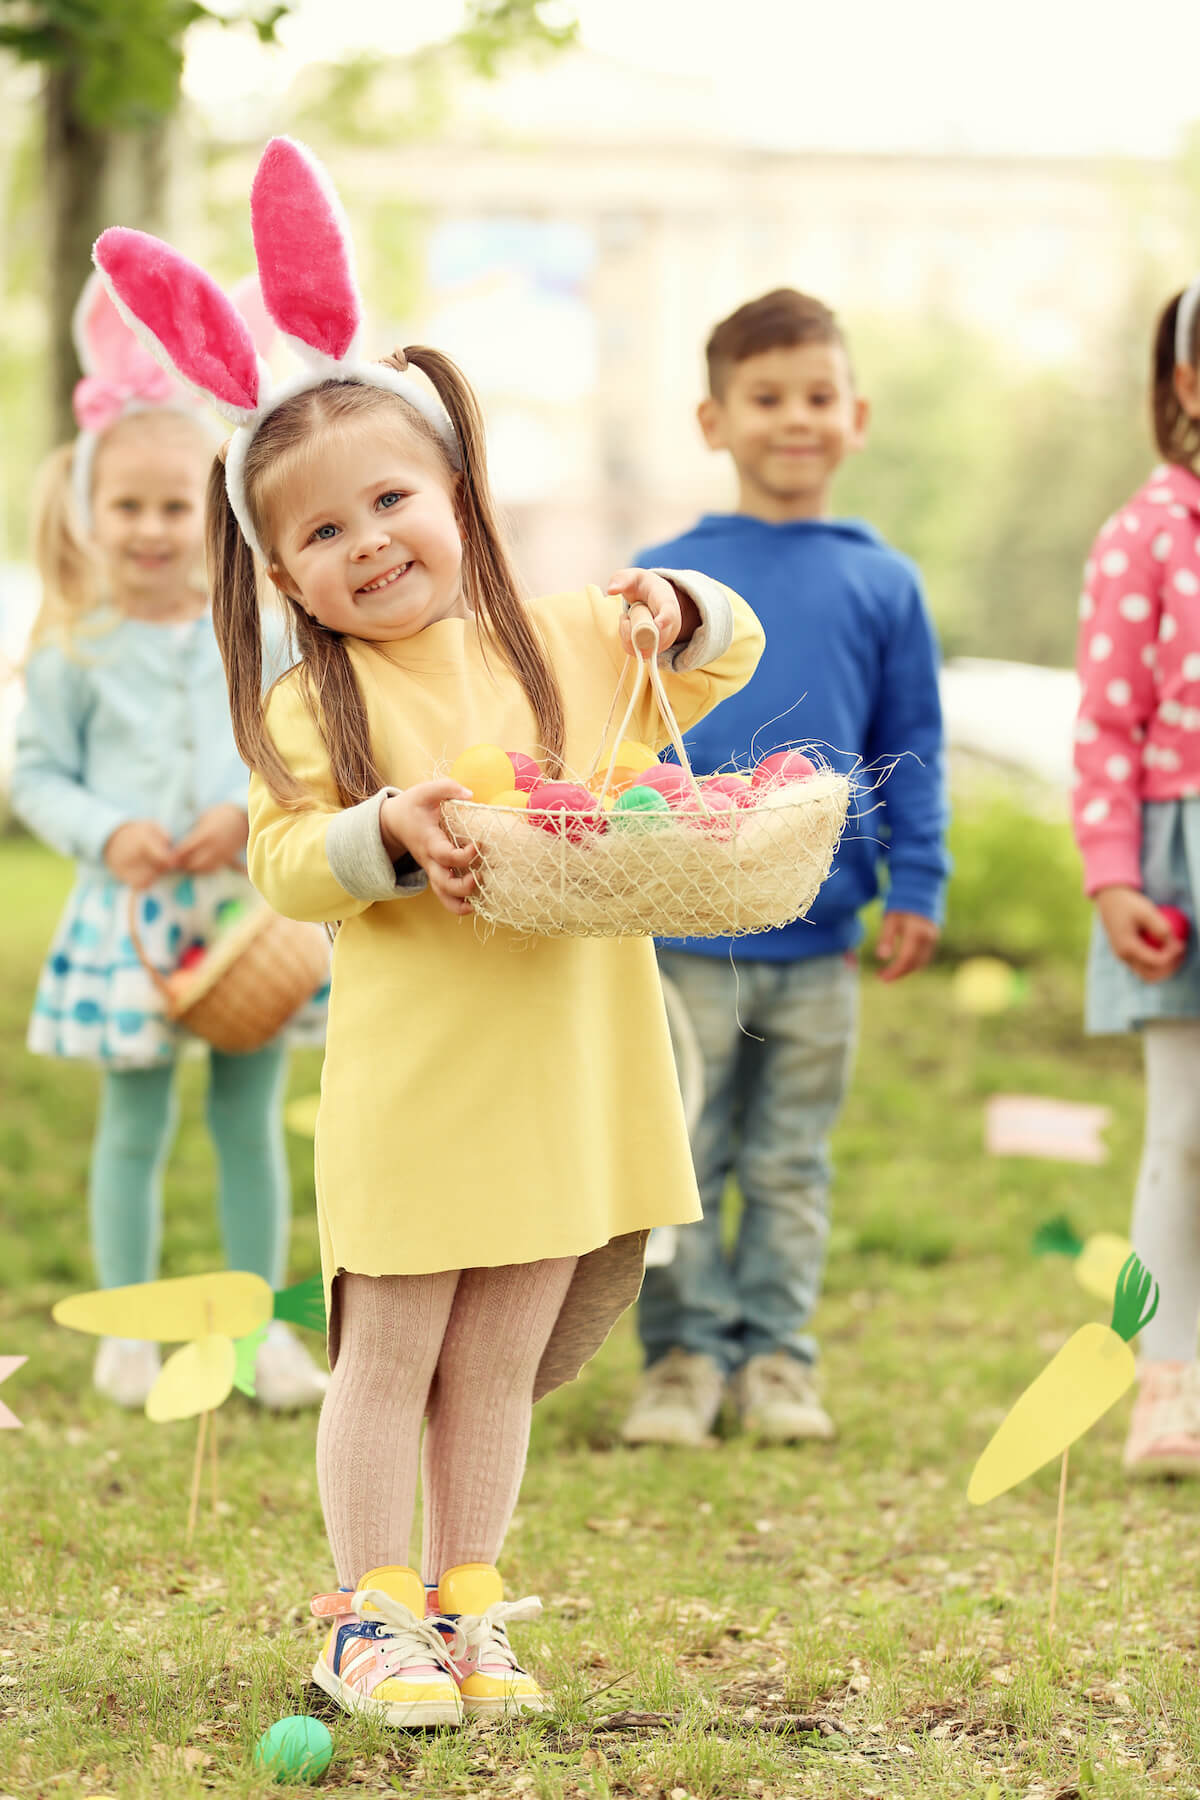 Kids with baskets of easter eggs during an easter egg hunt